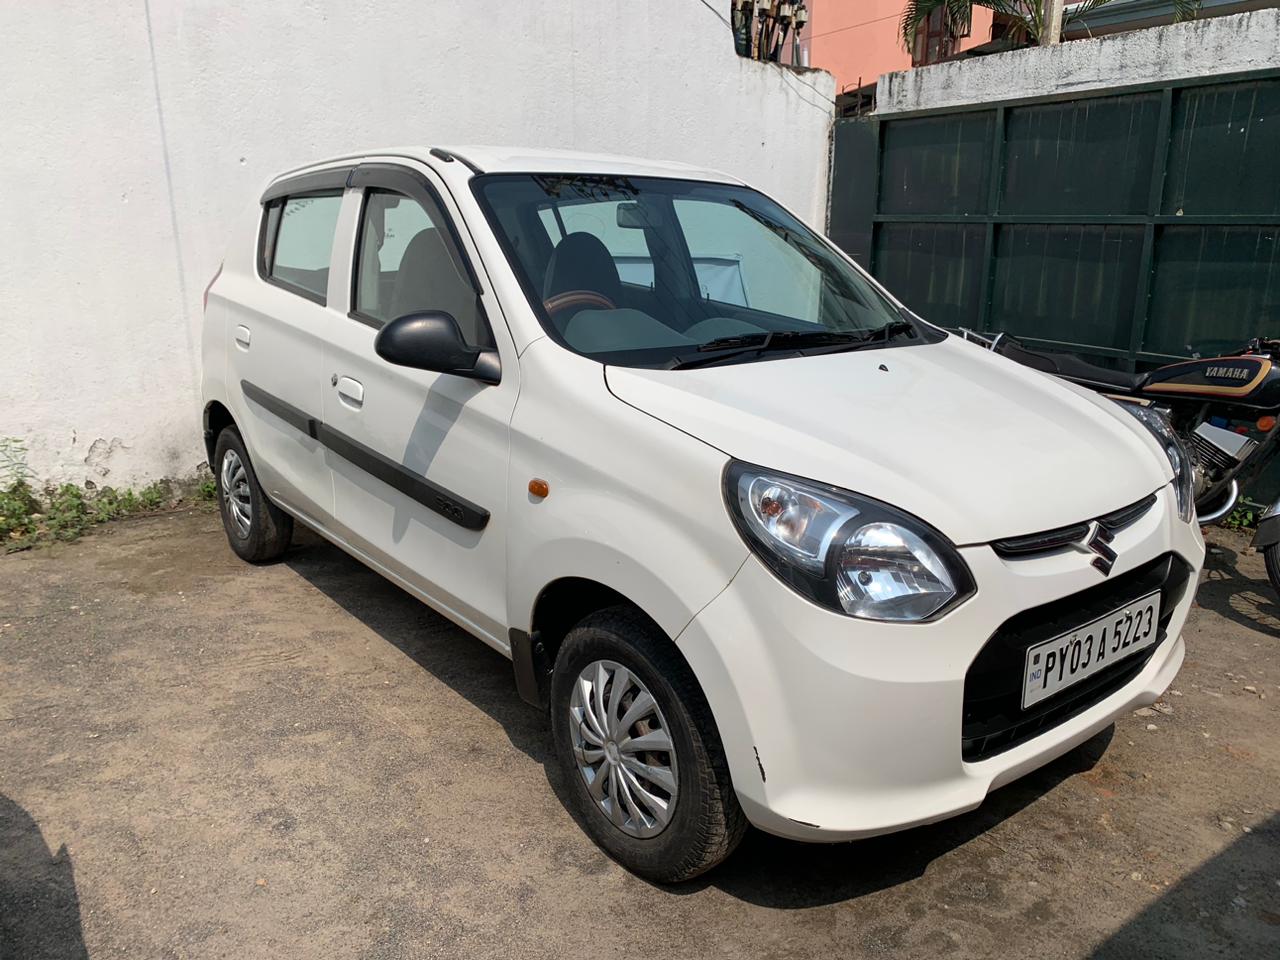 5080-for-sale-Maruthi-Suzuki-Alto-800-Petrol-First-Owner-2016-PY-registered-rs-260000